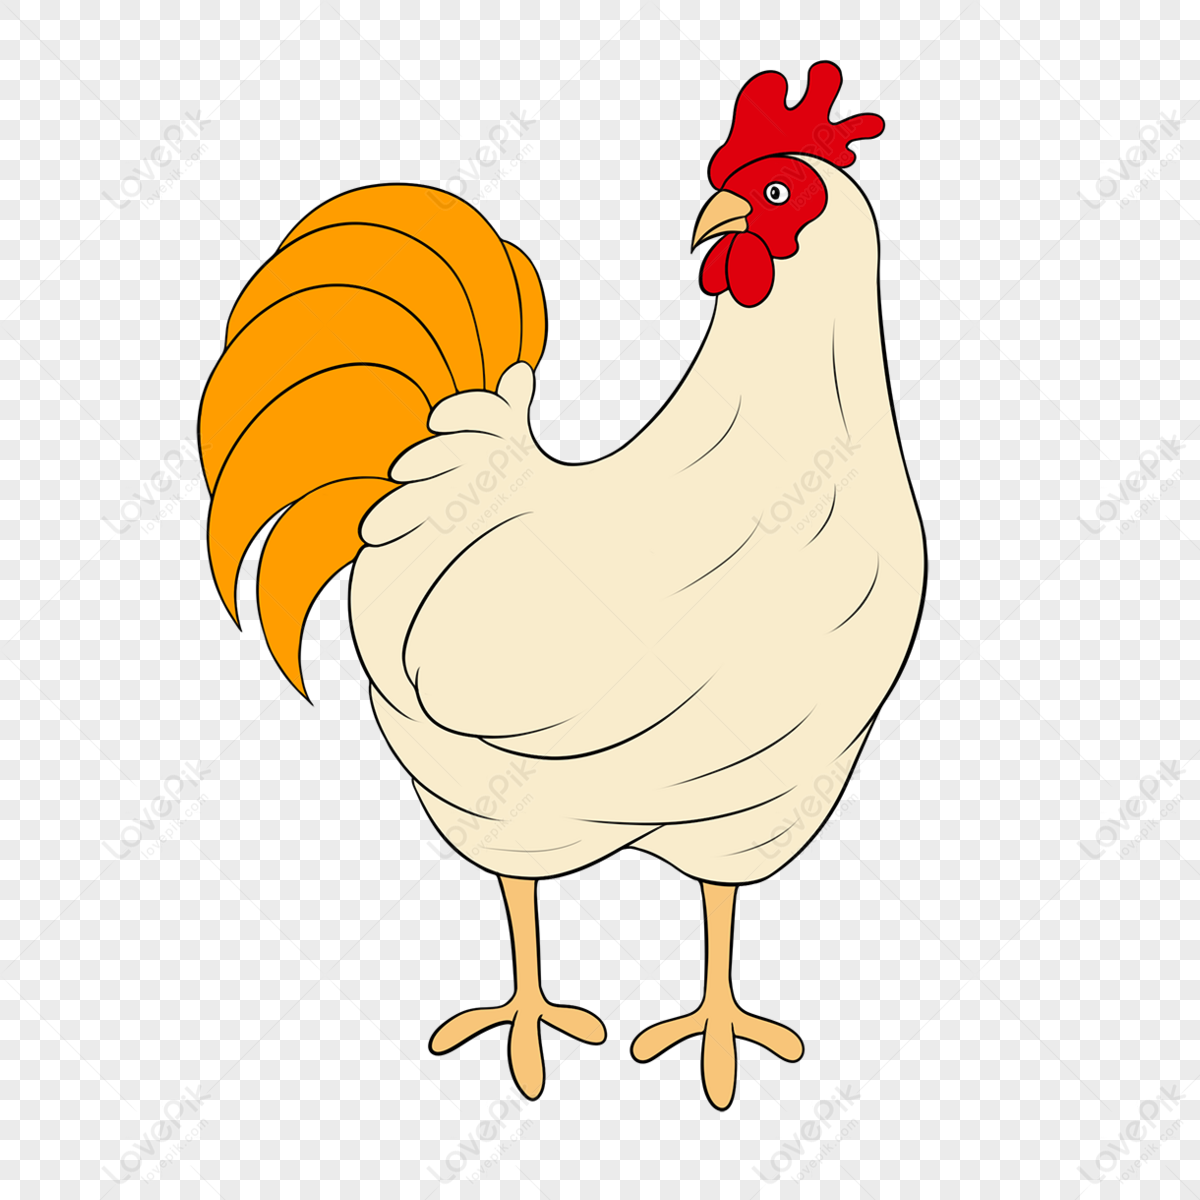 Yellow Orange Tailed Rooster Clip Art,chicken Clip Art,the Cock PNG ...